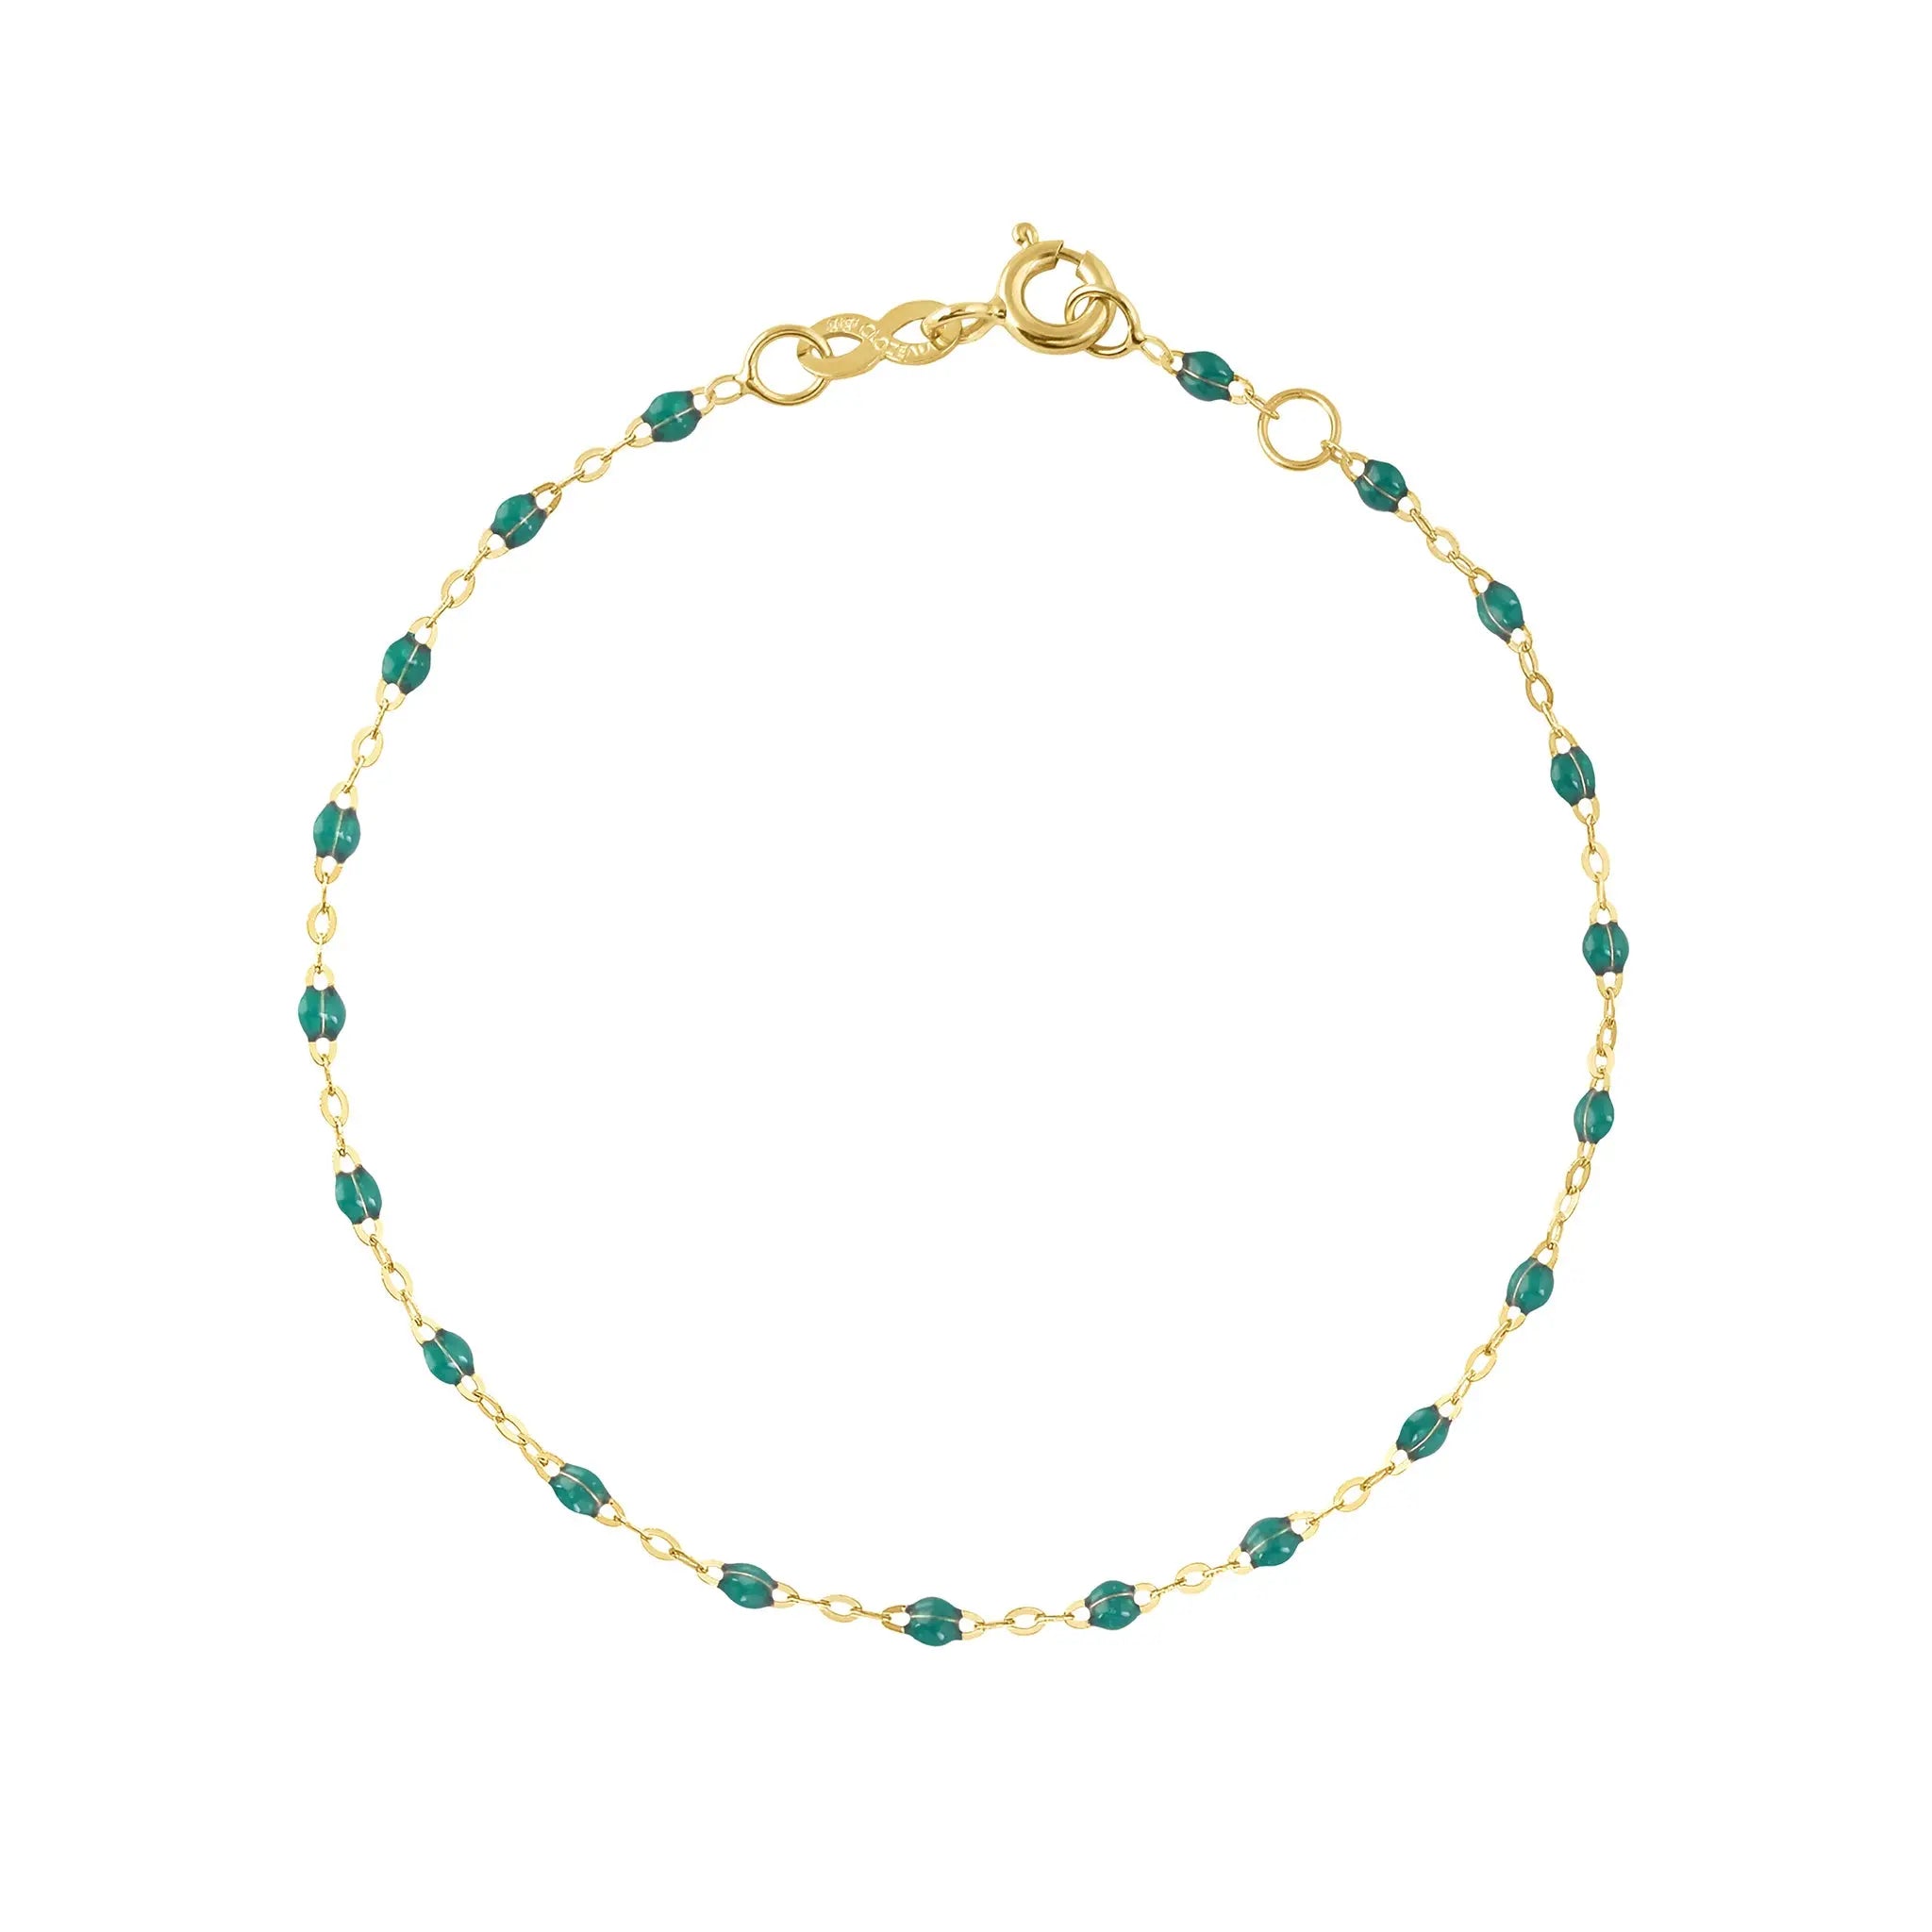 The Classic Gigi bracelet by gigi CLOZEAU features 18K Yellow Gold, and unique Emerald jewels for a simple, everyday look.   Each jewel is unique, artisanally made in their family-owned workshop. 18K yellow gold and resin. The bracelet measures 6.7 inches with adjustable clasp at 6.3 inches.